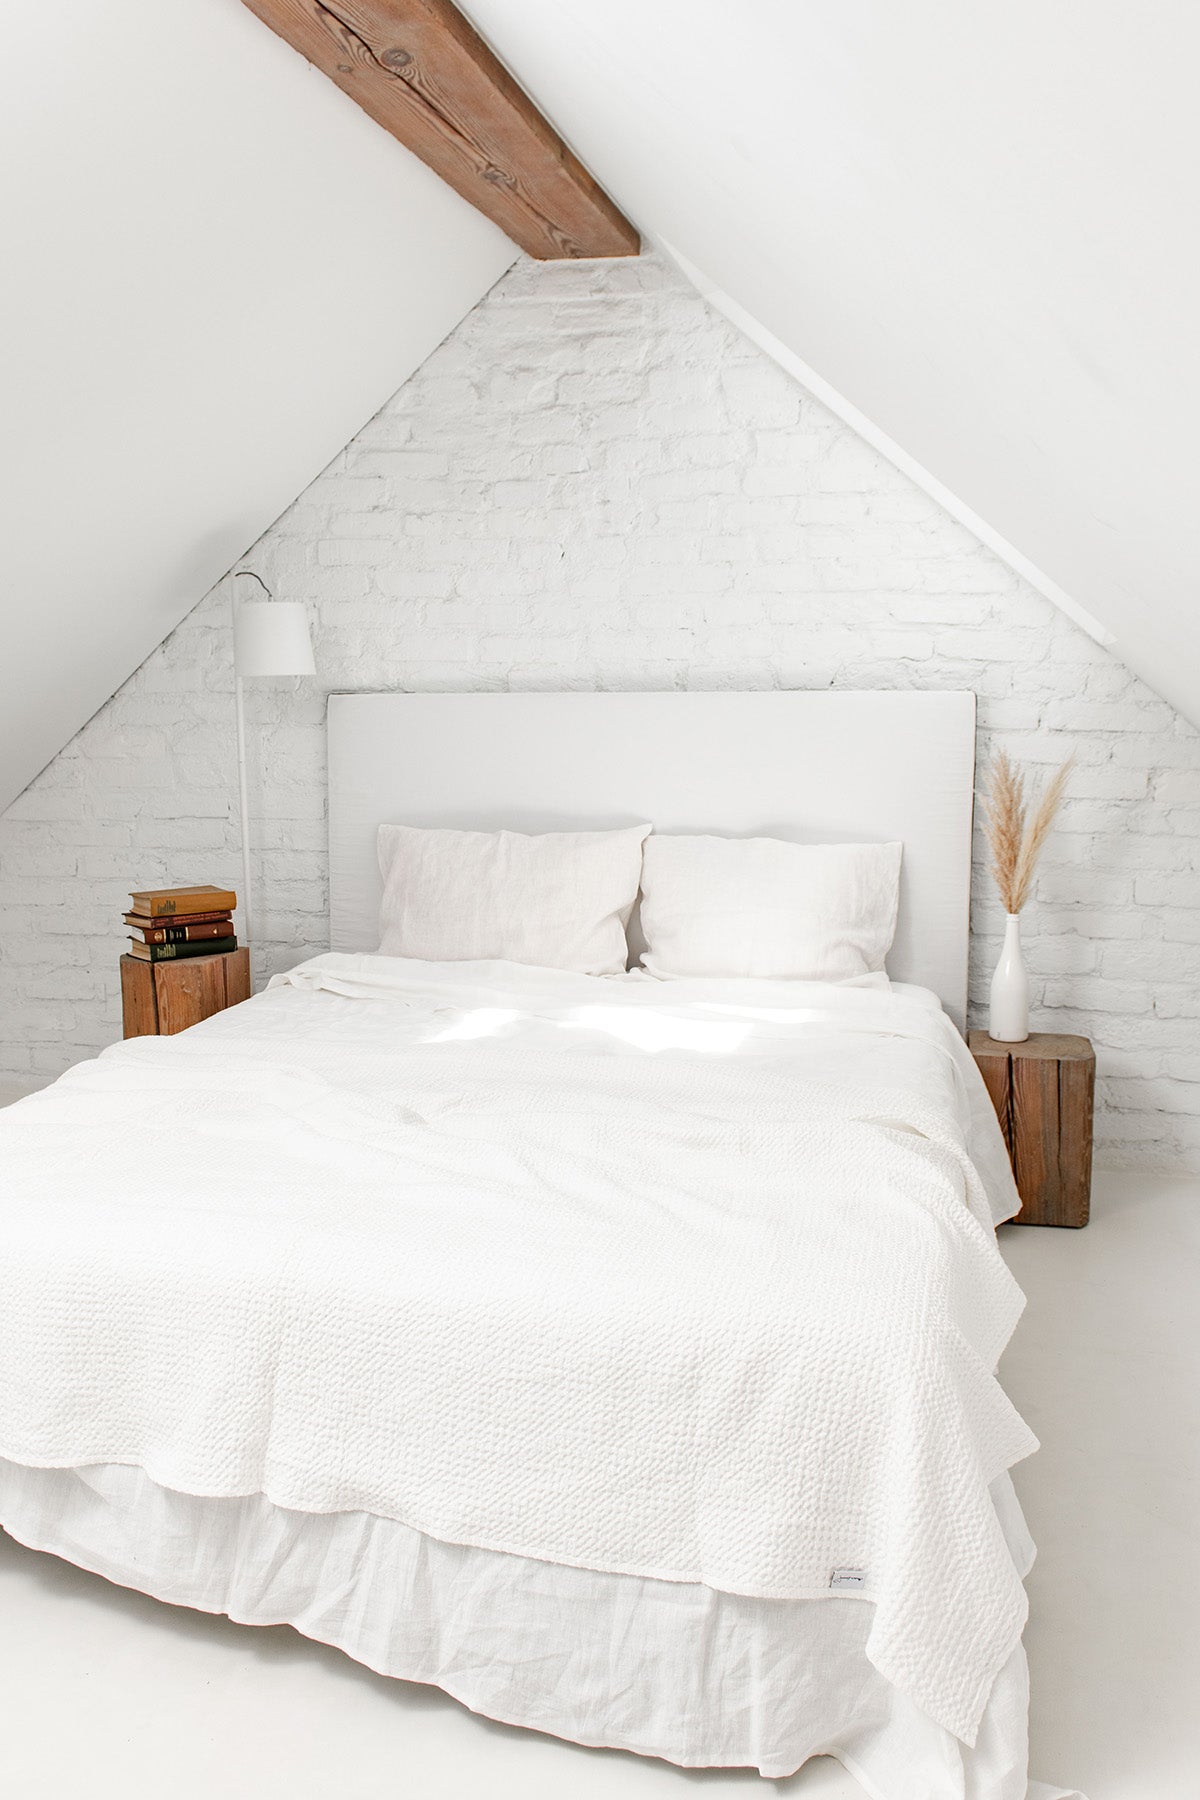 White Rustic Room WIth White Bed and White Linen Bed Throw